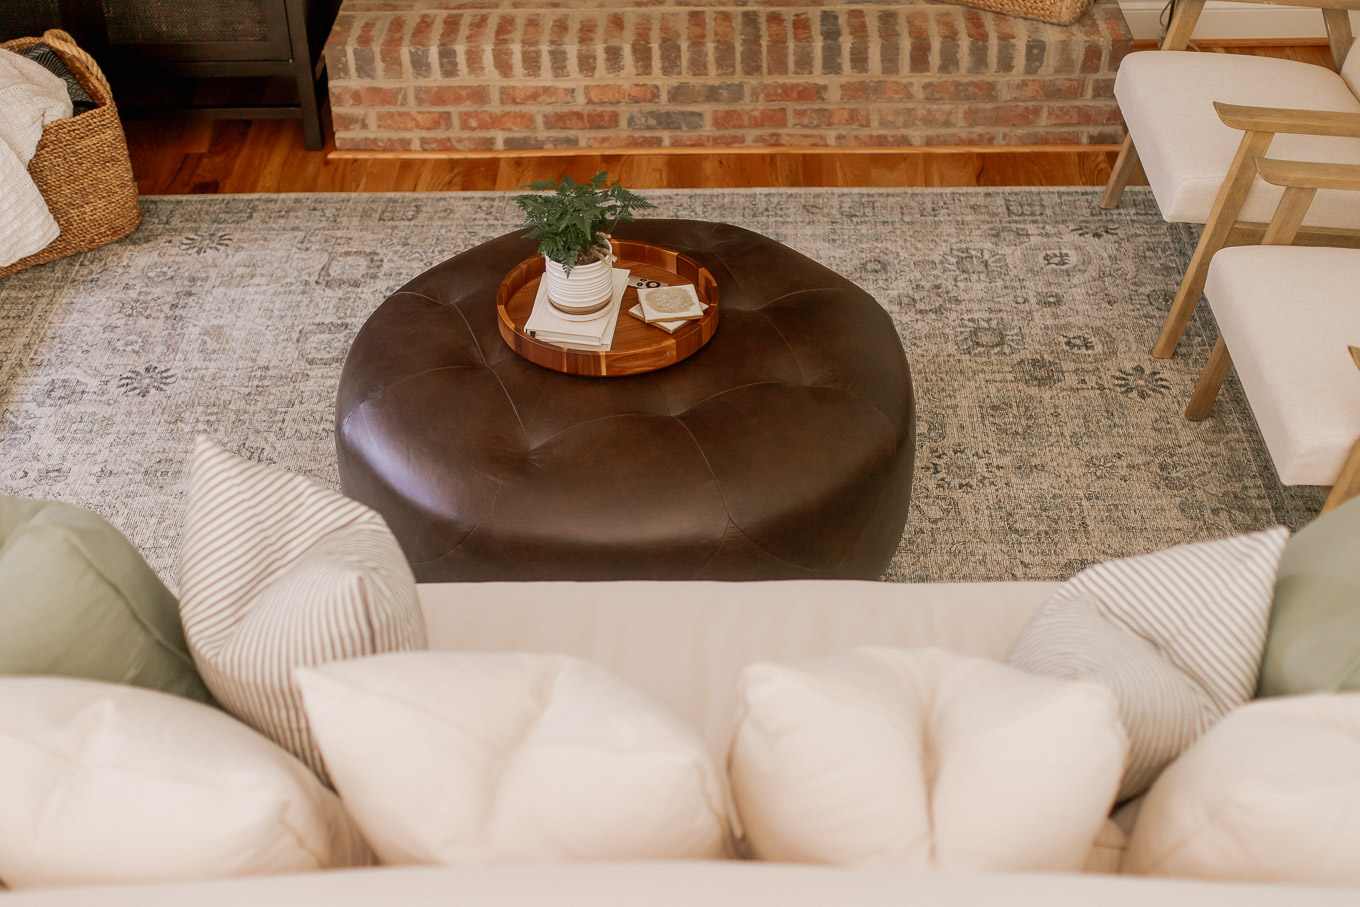 Round Leather Ottoman | Searching for the Perfect Coffee Table - Article Timpani Ottoman Review - Louella Reese, North Carolina Lifestyle and Fashion Blog